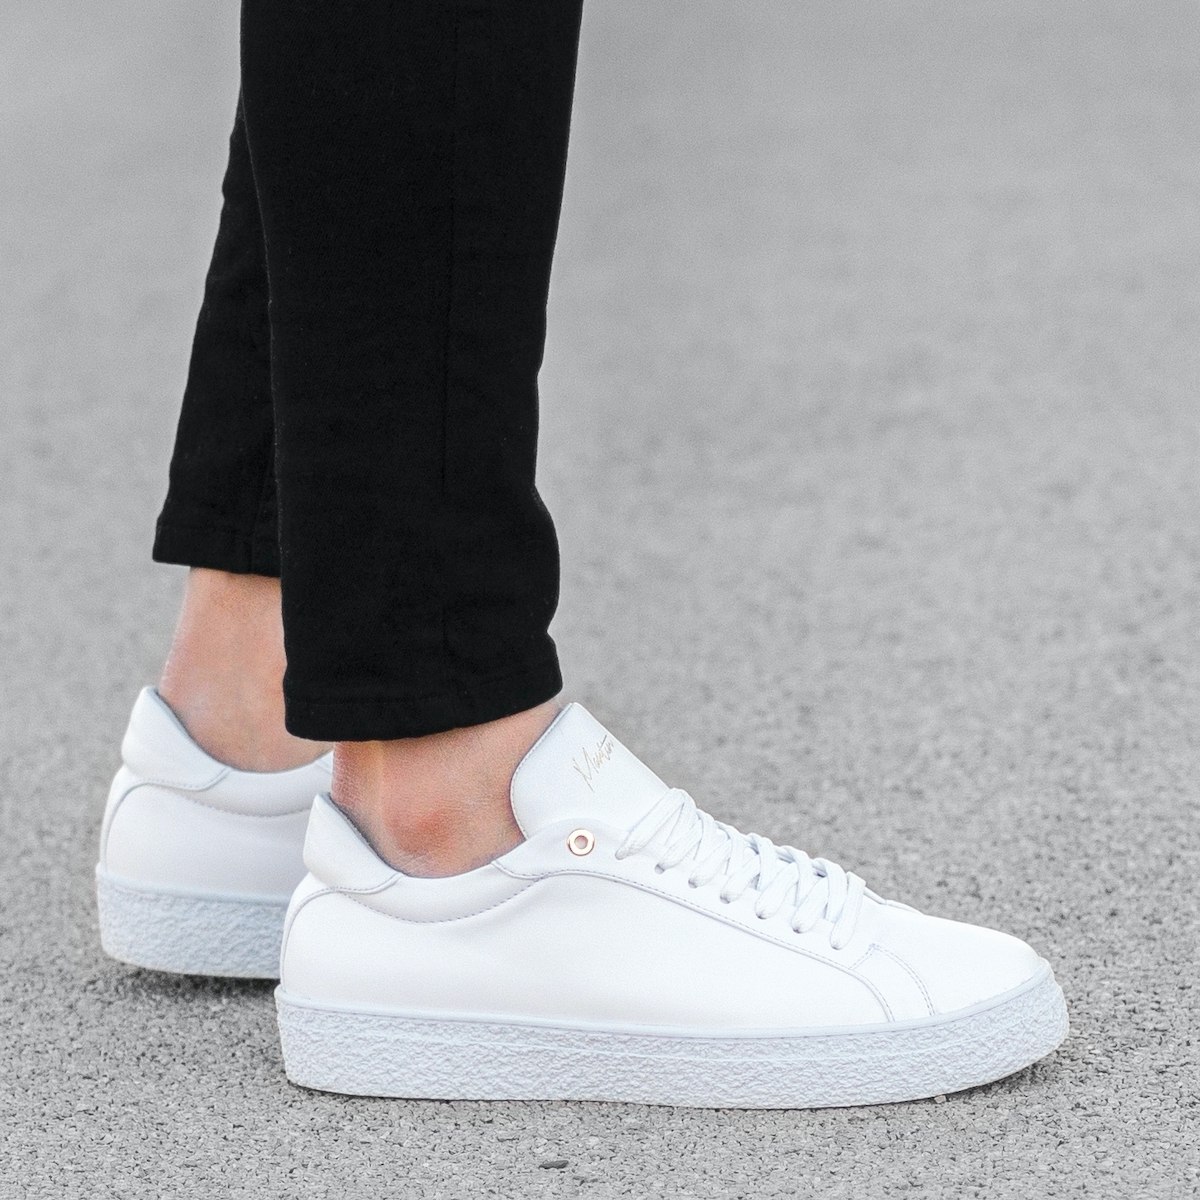 Men’s Rubber Sole Shoes Sneakers White